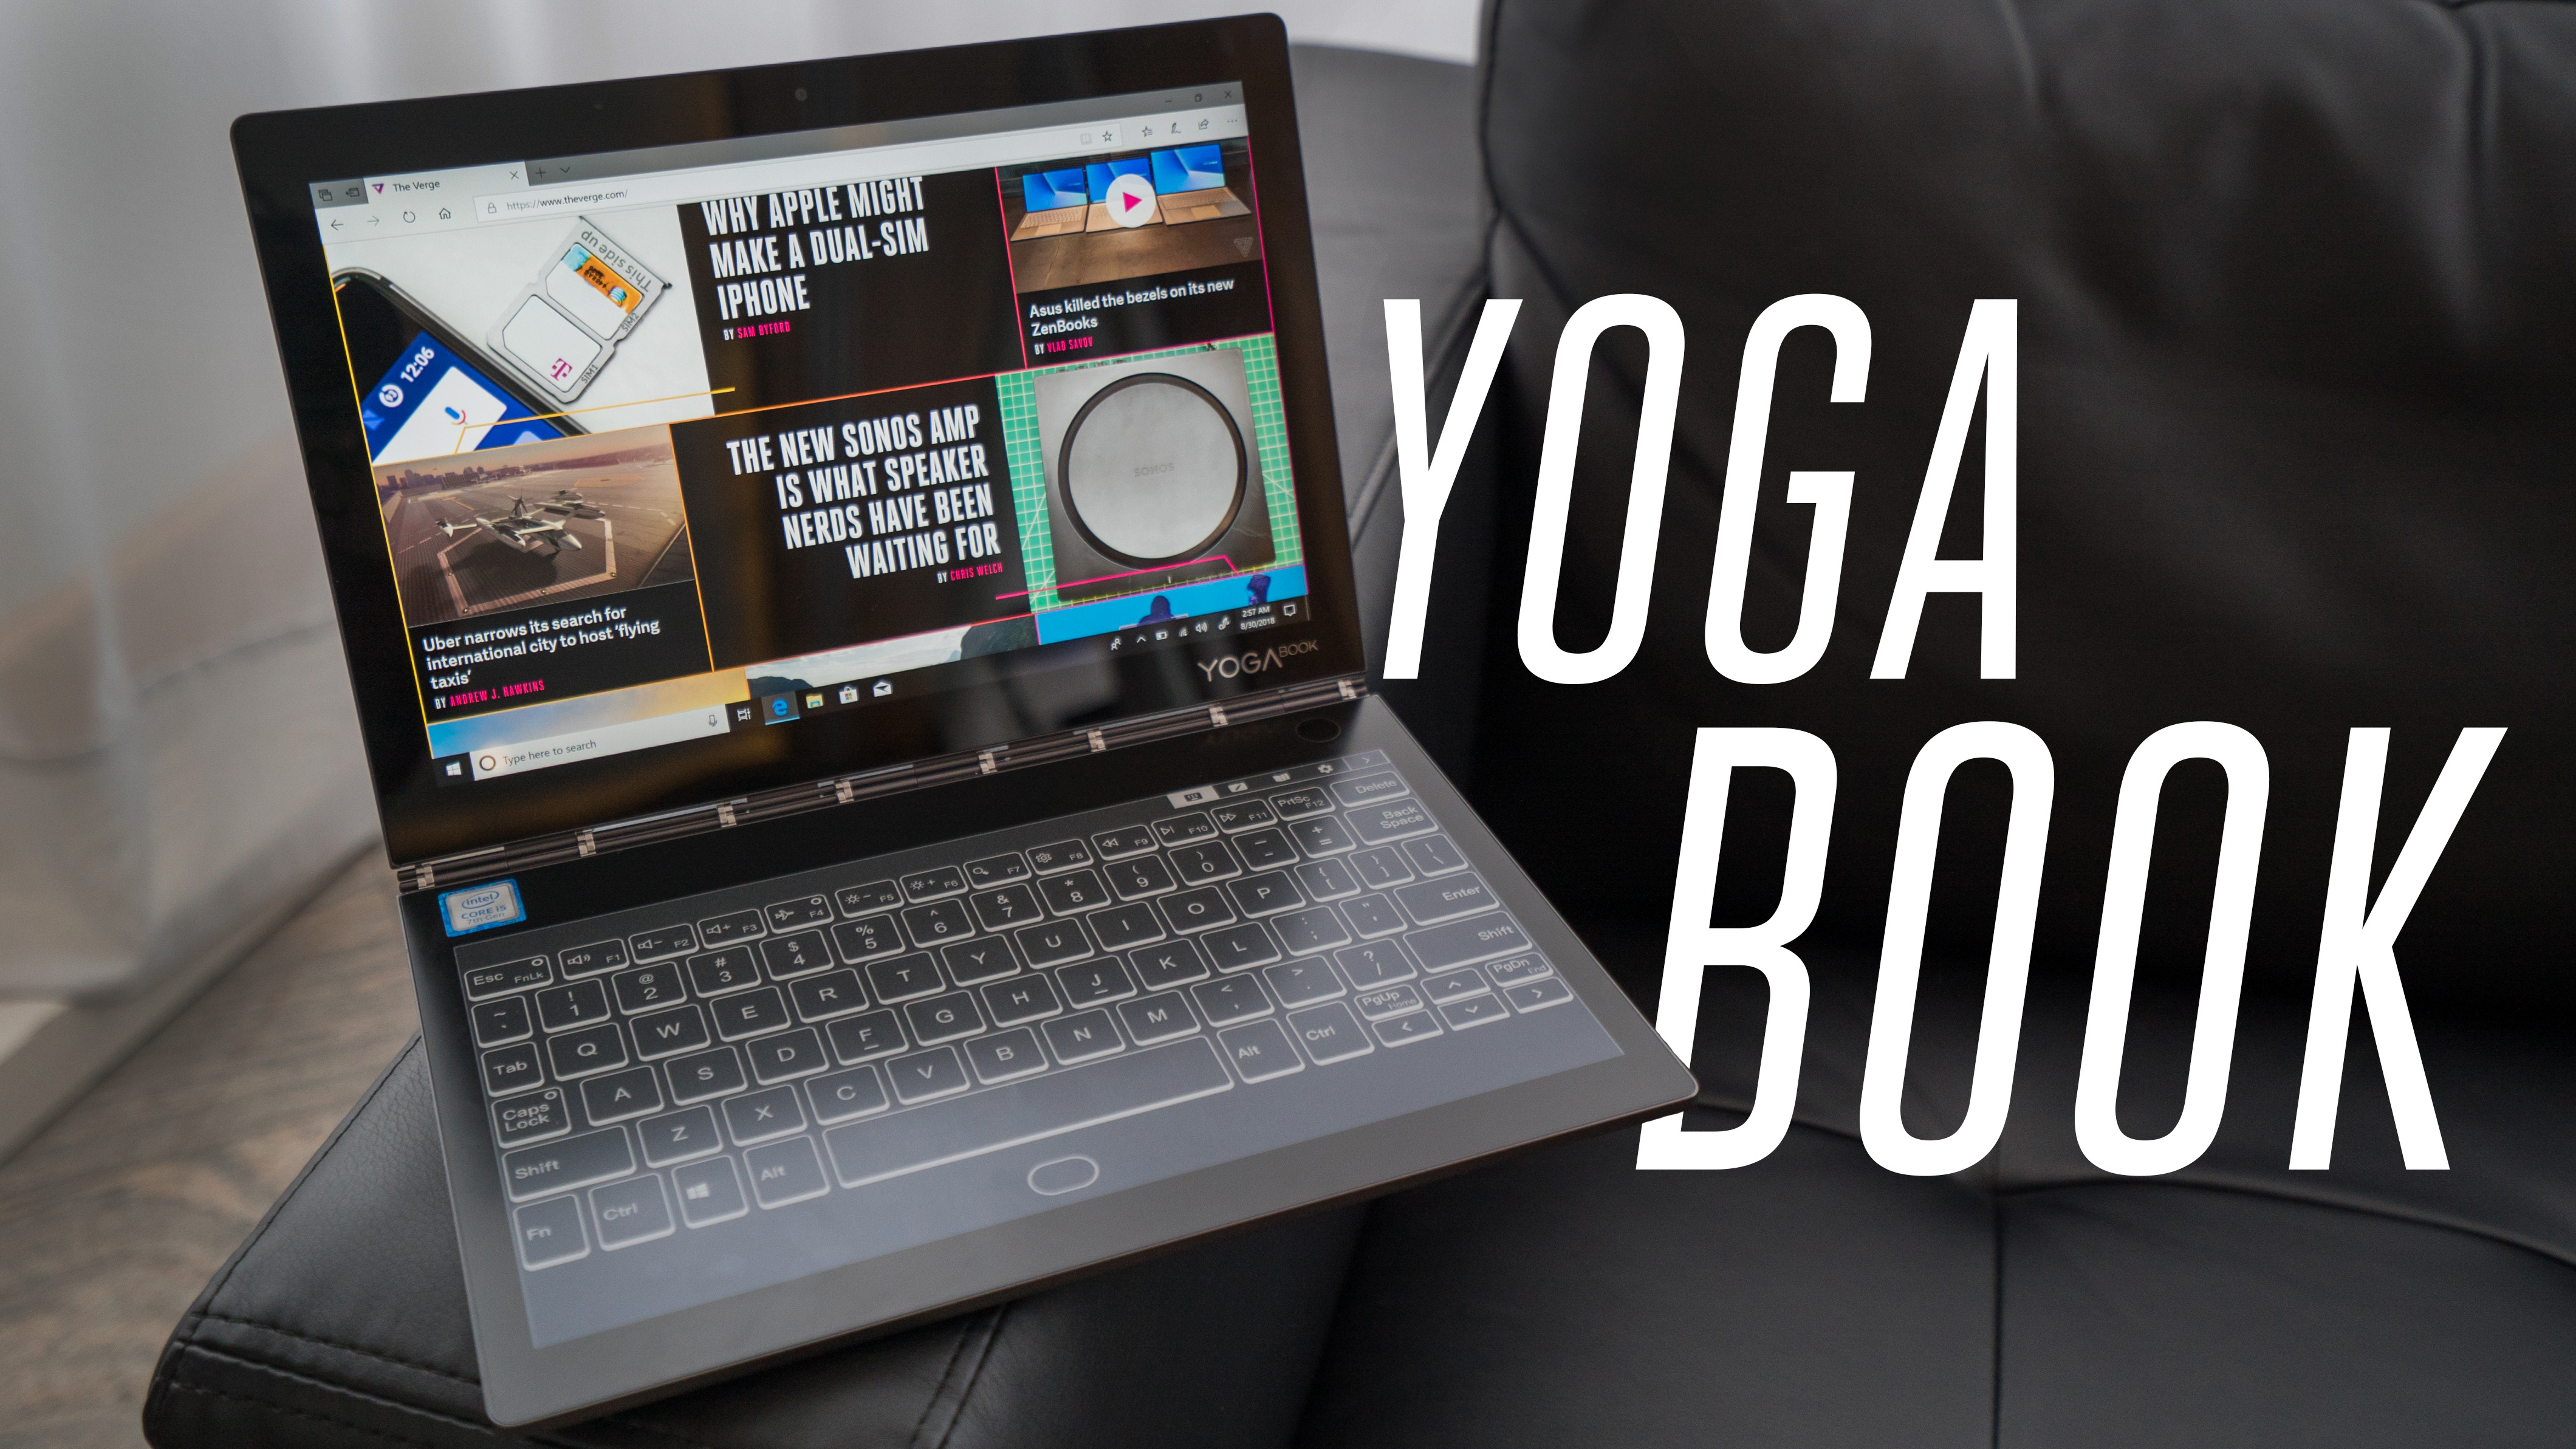 Lenovo Yoga Book C930 Review: E-Ink Just Isn't Our Type